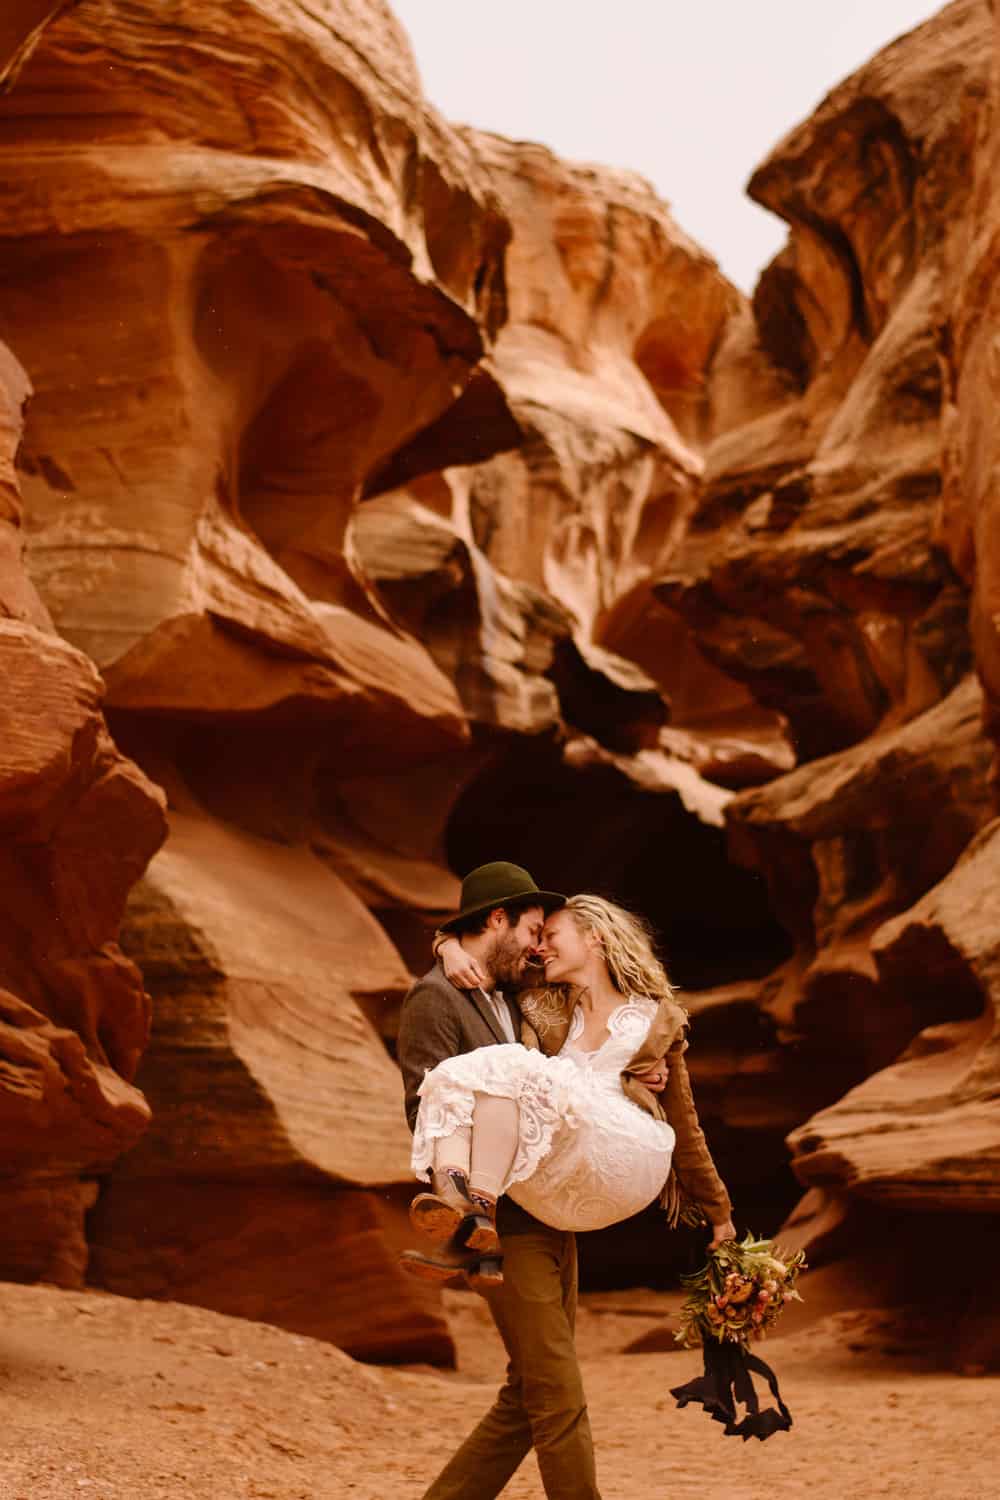 A groom scoops up his bride as they smile holding each other in a slot canyon.